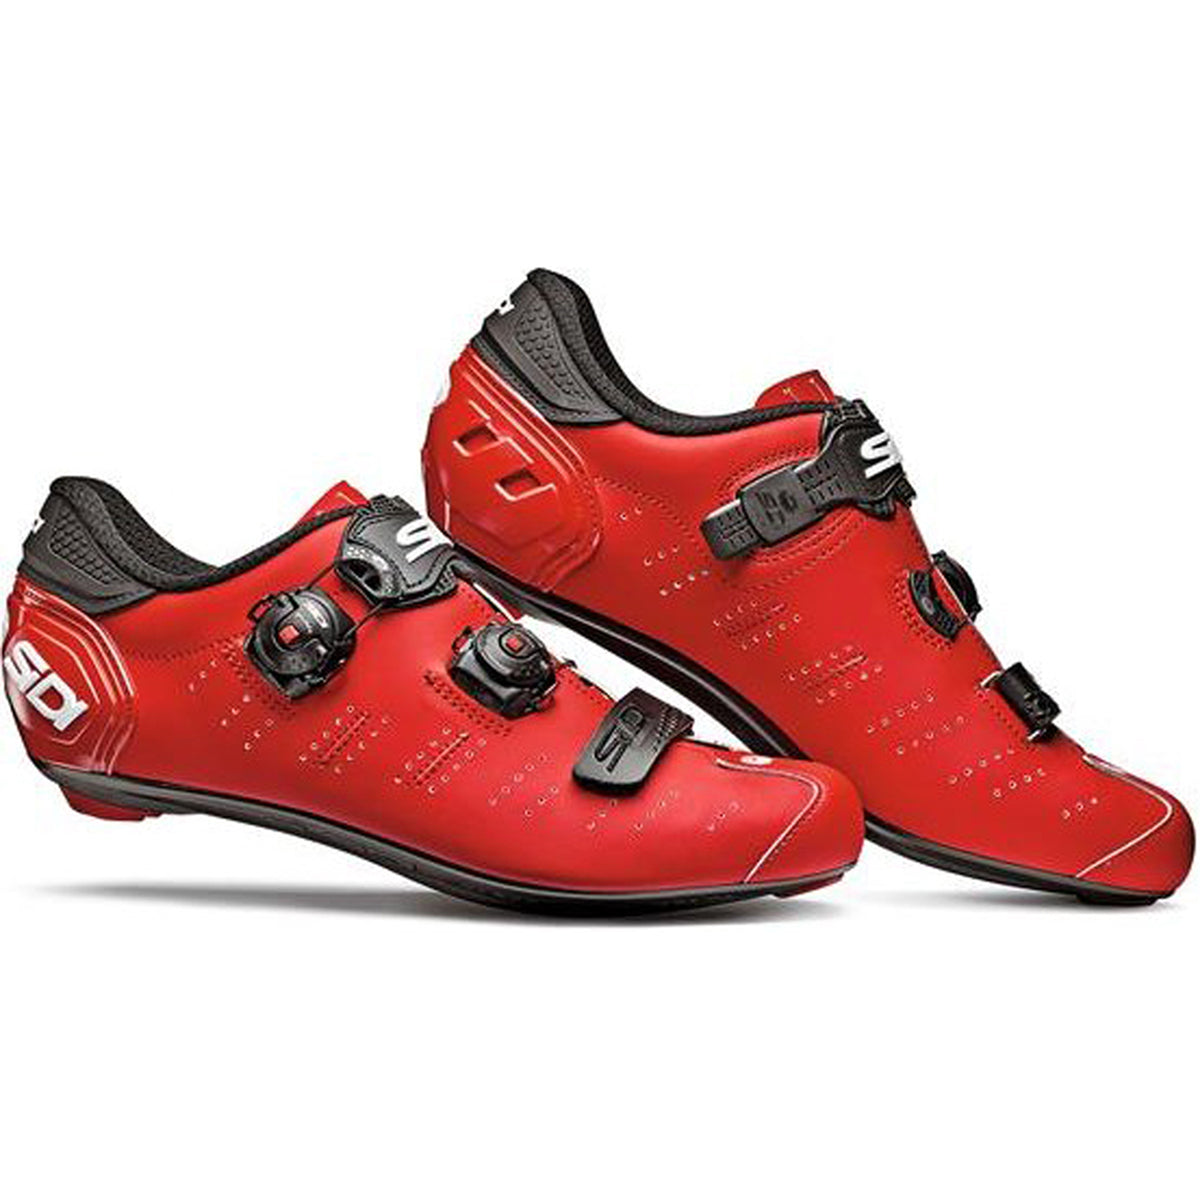 Sidi Ergo 5 Road Bicycle Shoes (CLOSEOUT) - Matte Red/Black